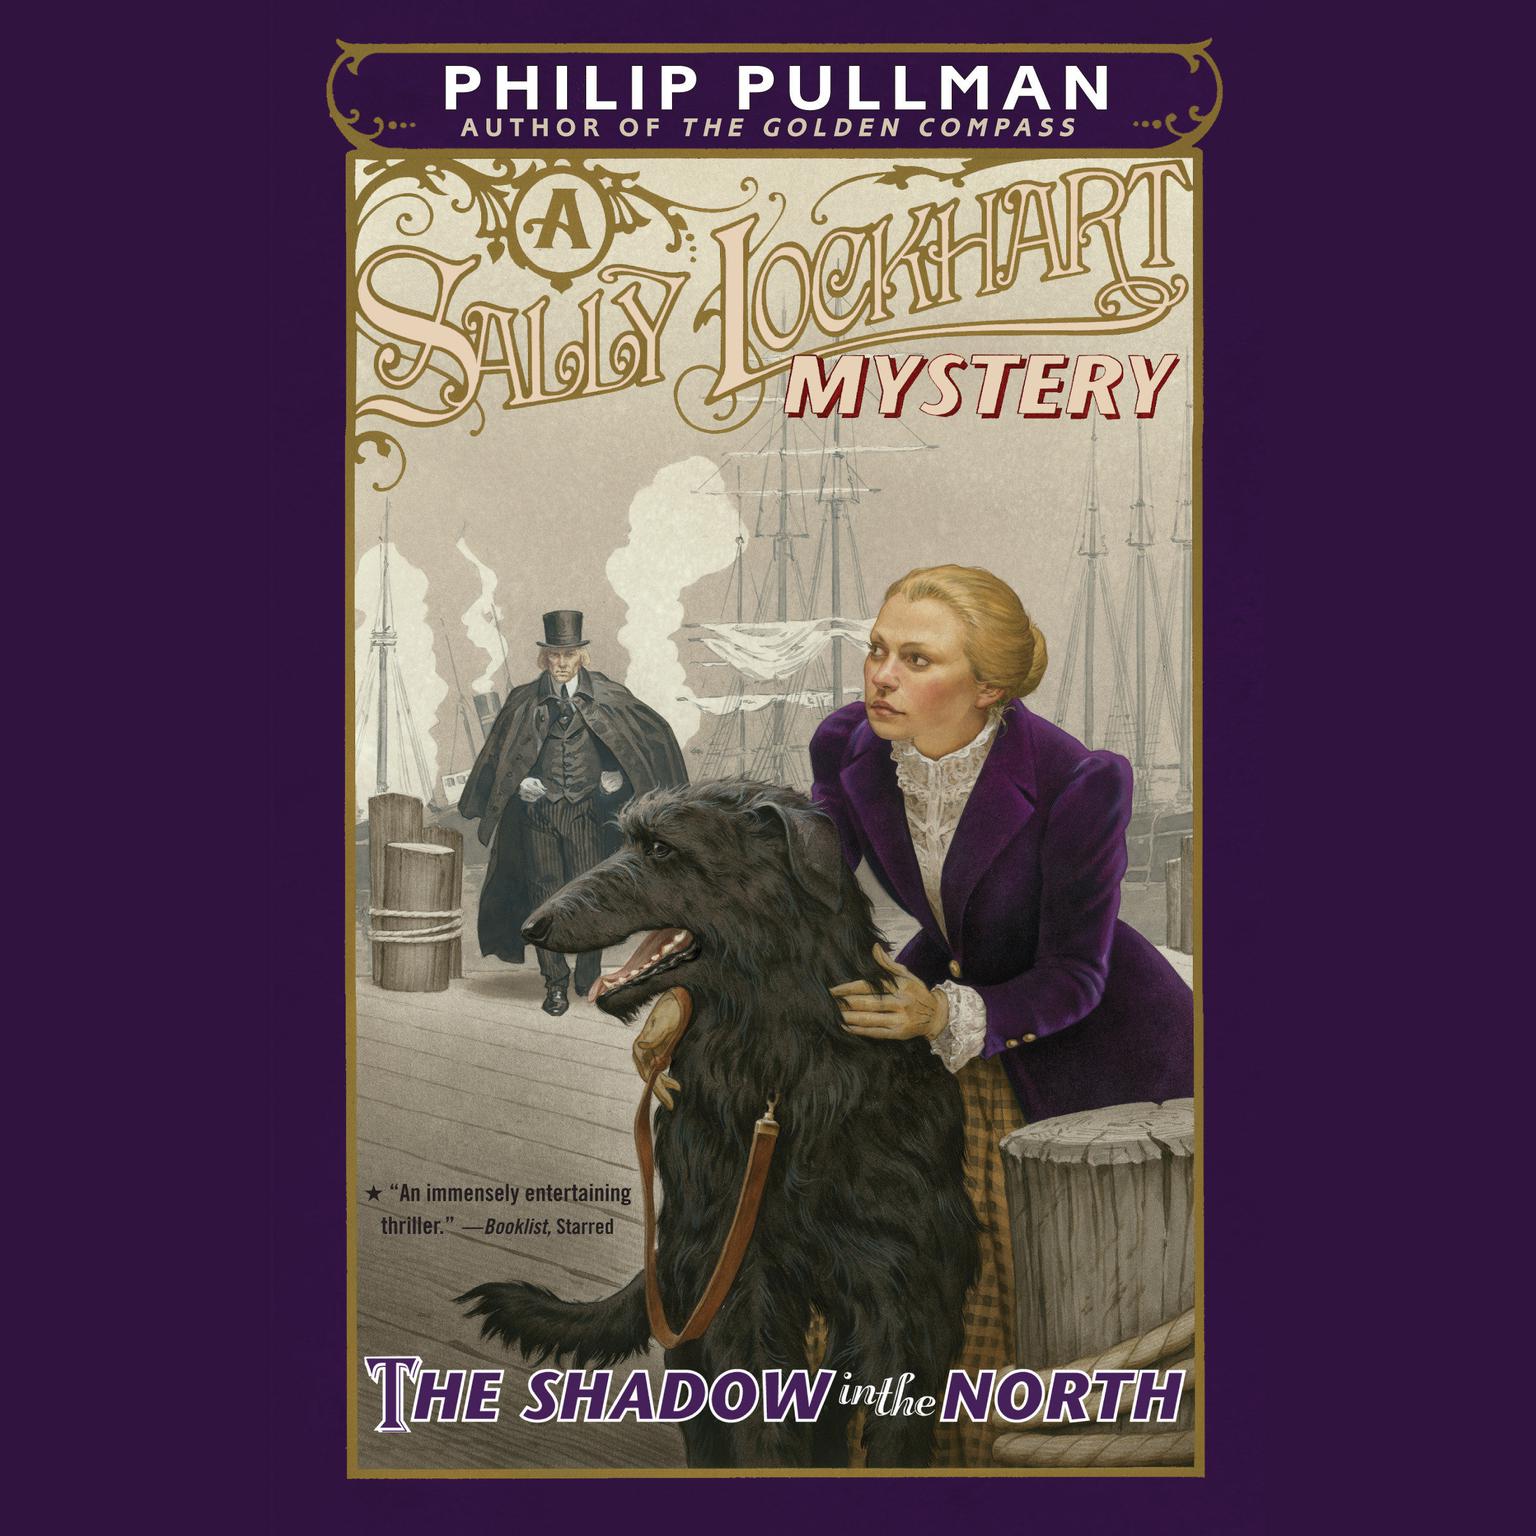 The Shadow in the North: A Sally Lockhart Mystery: Book Two Audiobook, by Philip Pullman